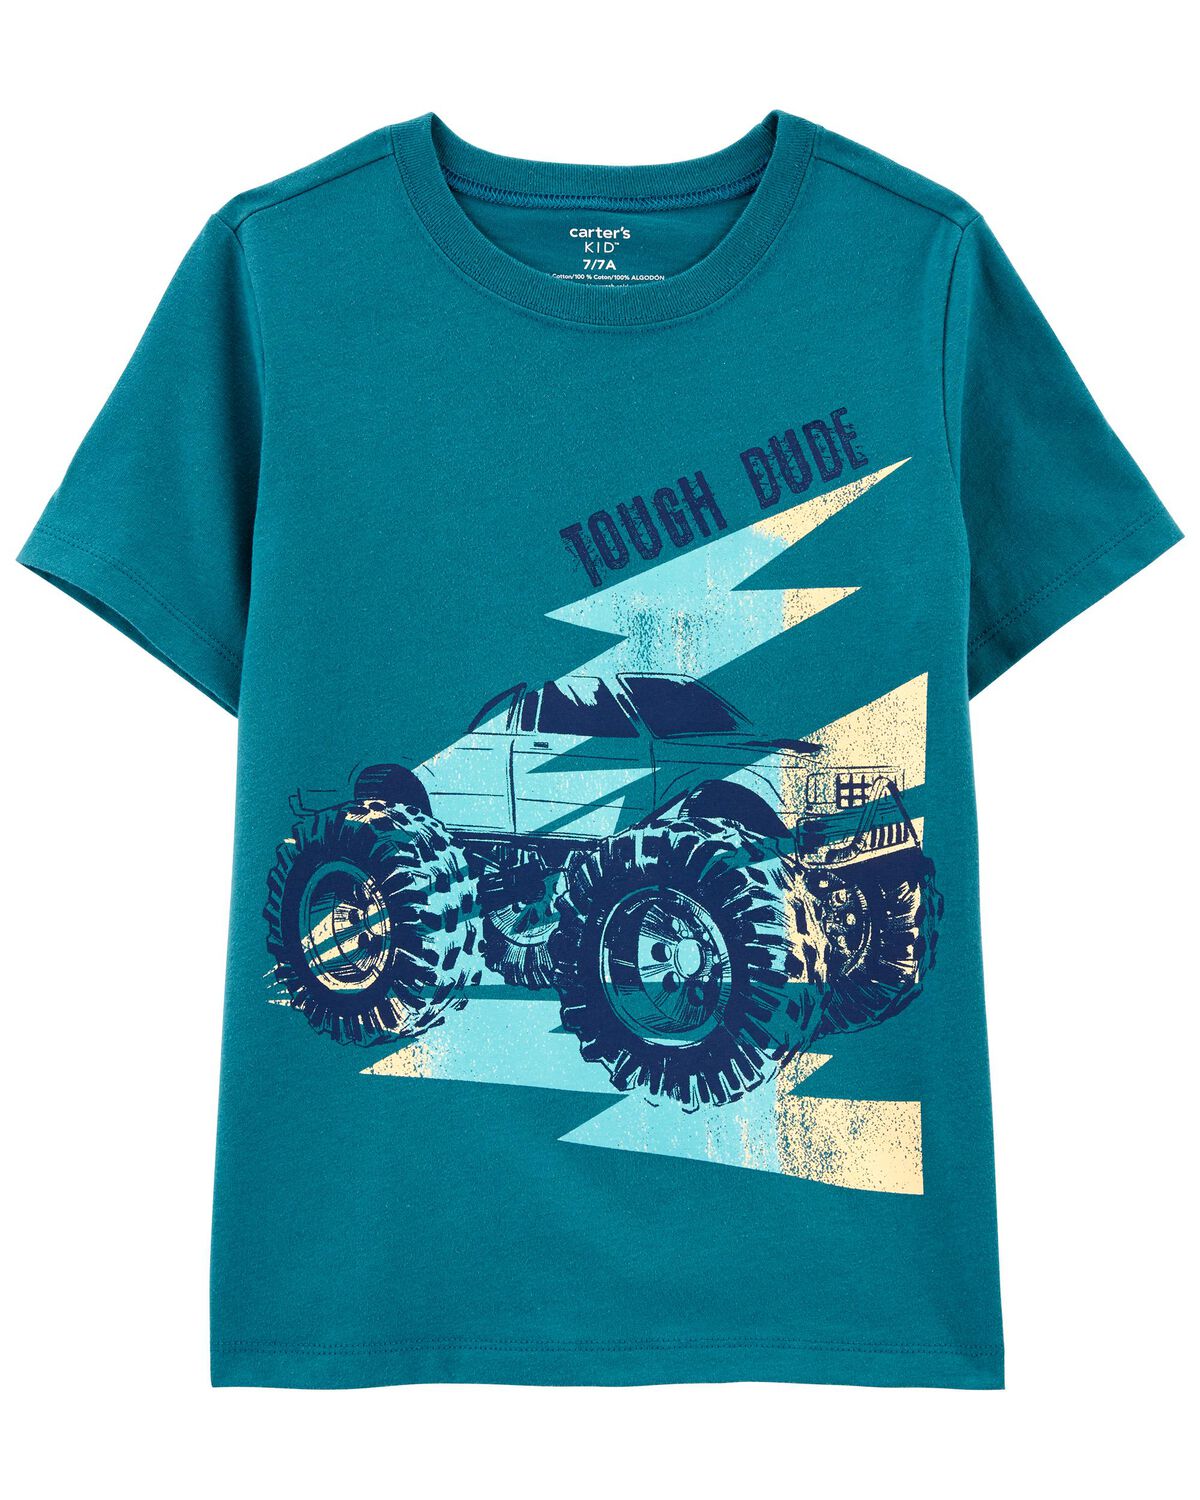 Blue Kid Monster Truck Tough Dude Graphic Tee | carters.com